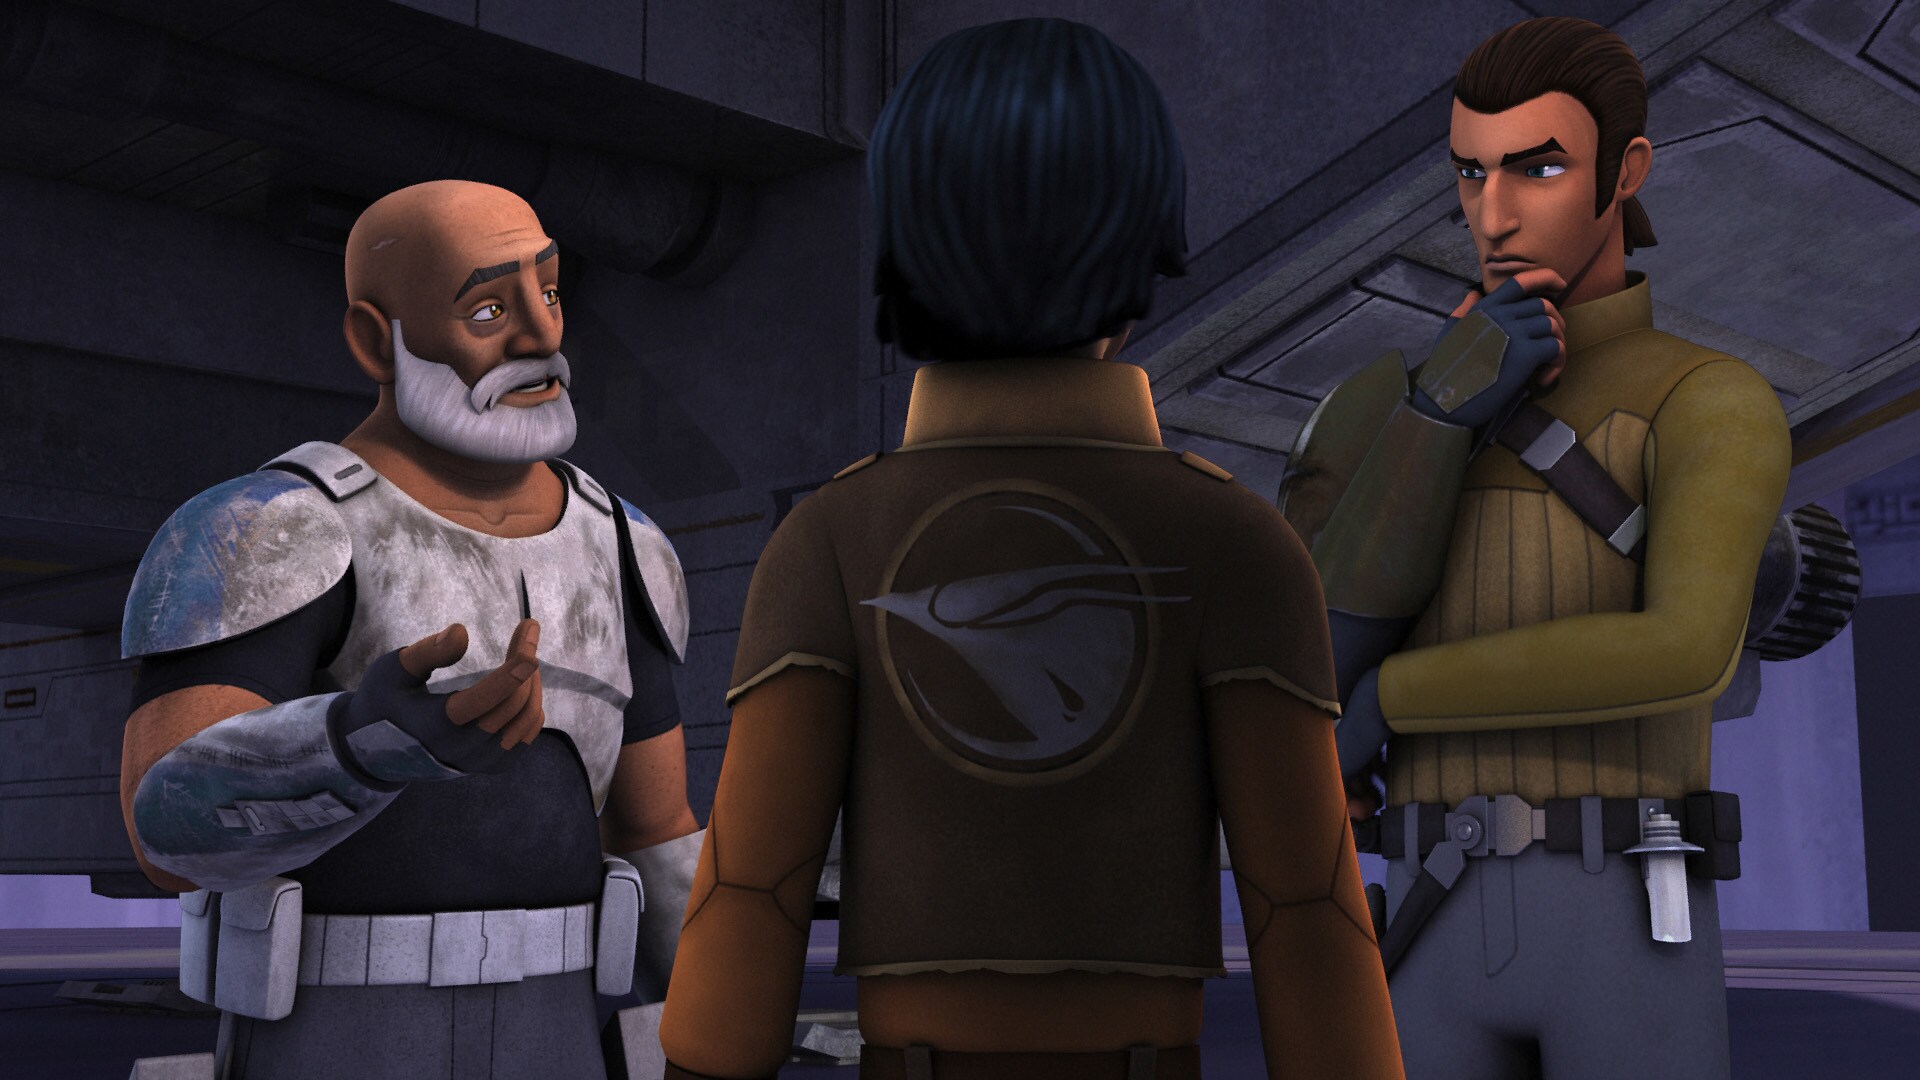 While working on his blaster skills with Chopper, Rex gives advice to Ezra to better his aim. Kan...